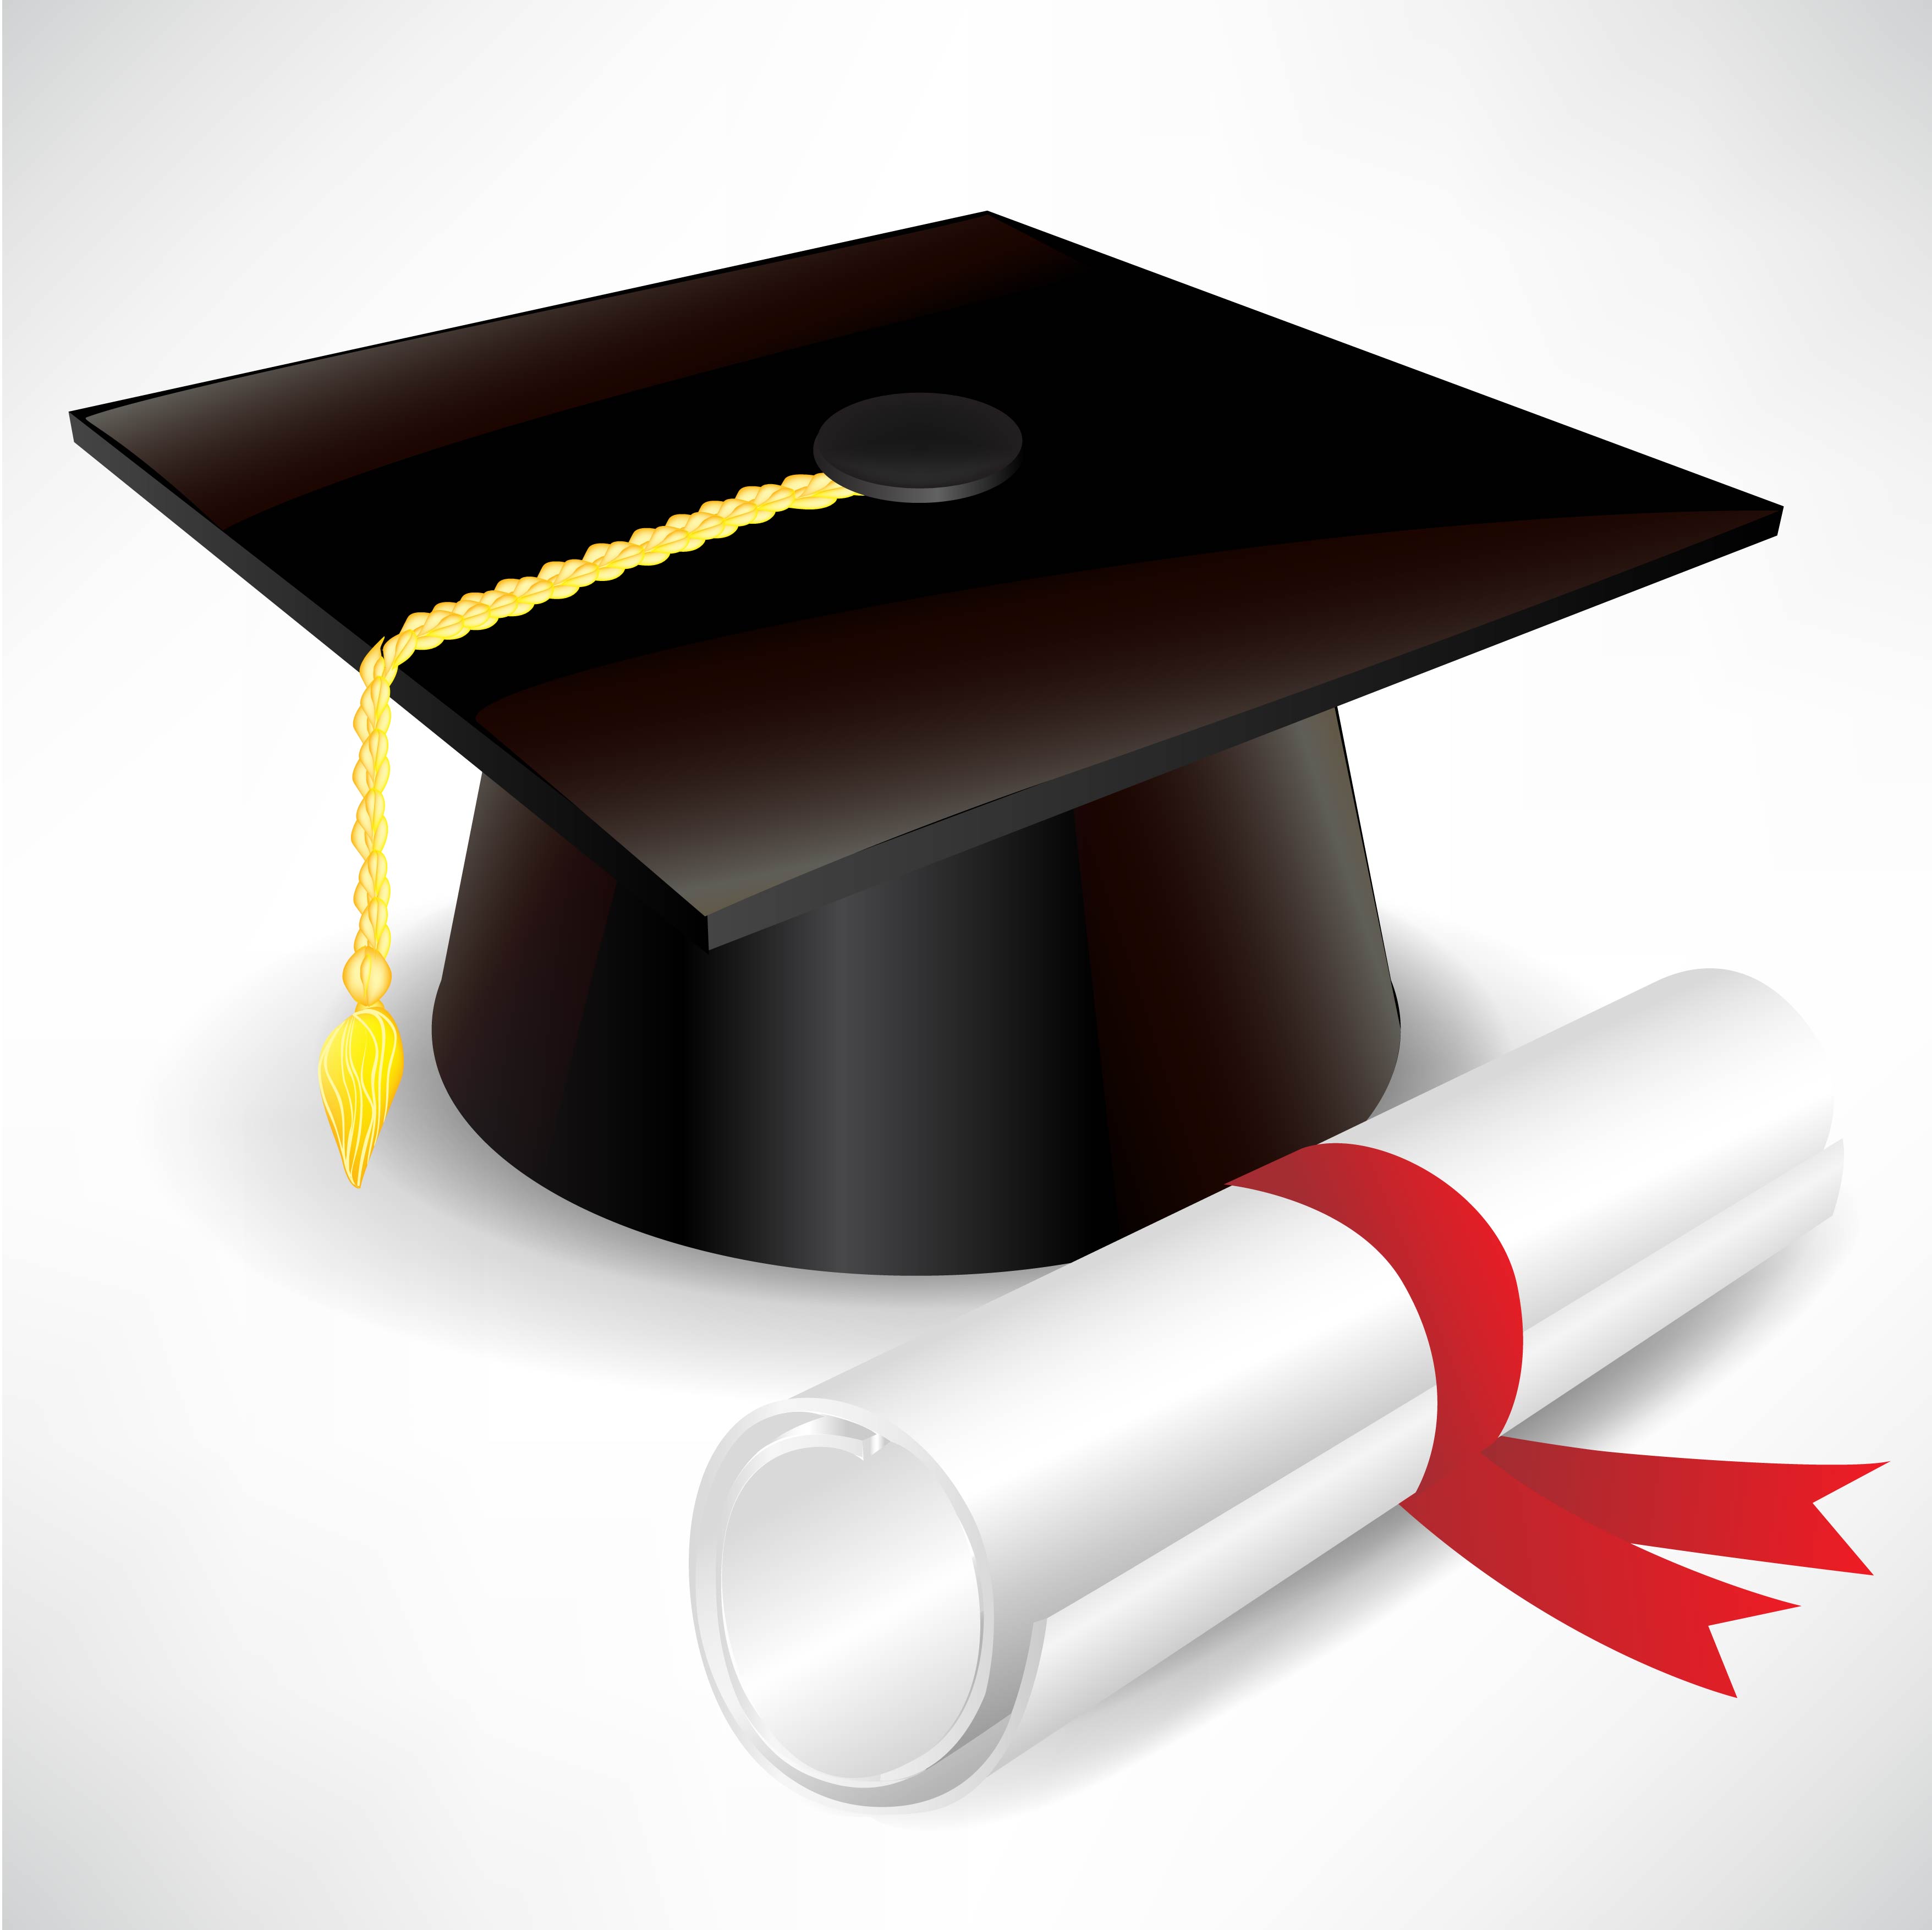 Picture Of Graduation Cap And Diploma | Free Download Clip Art ...